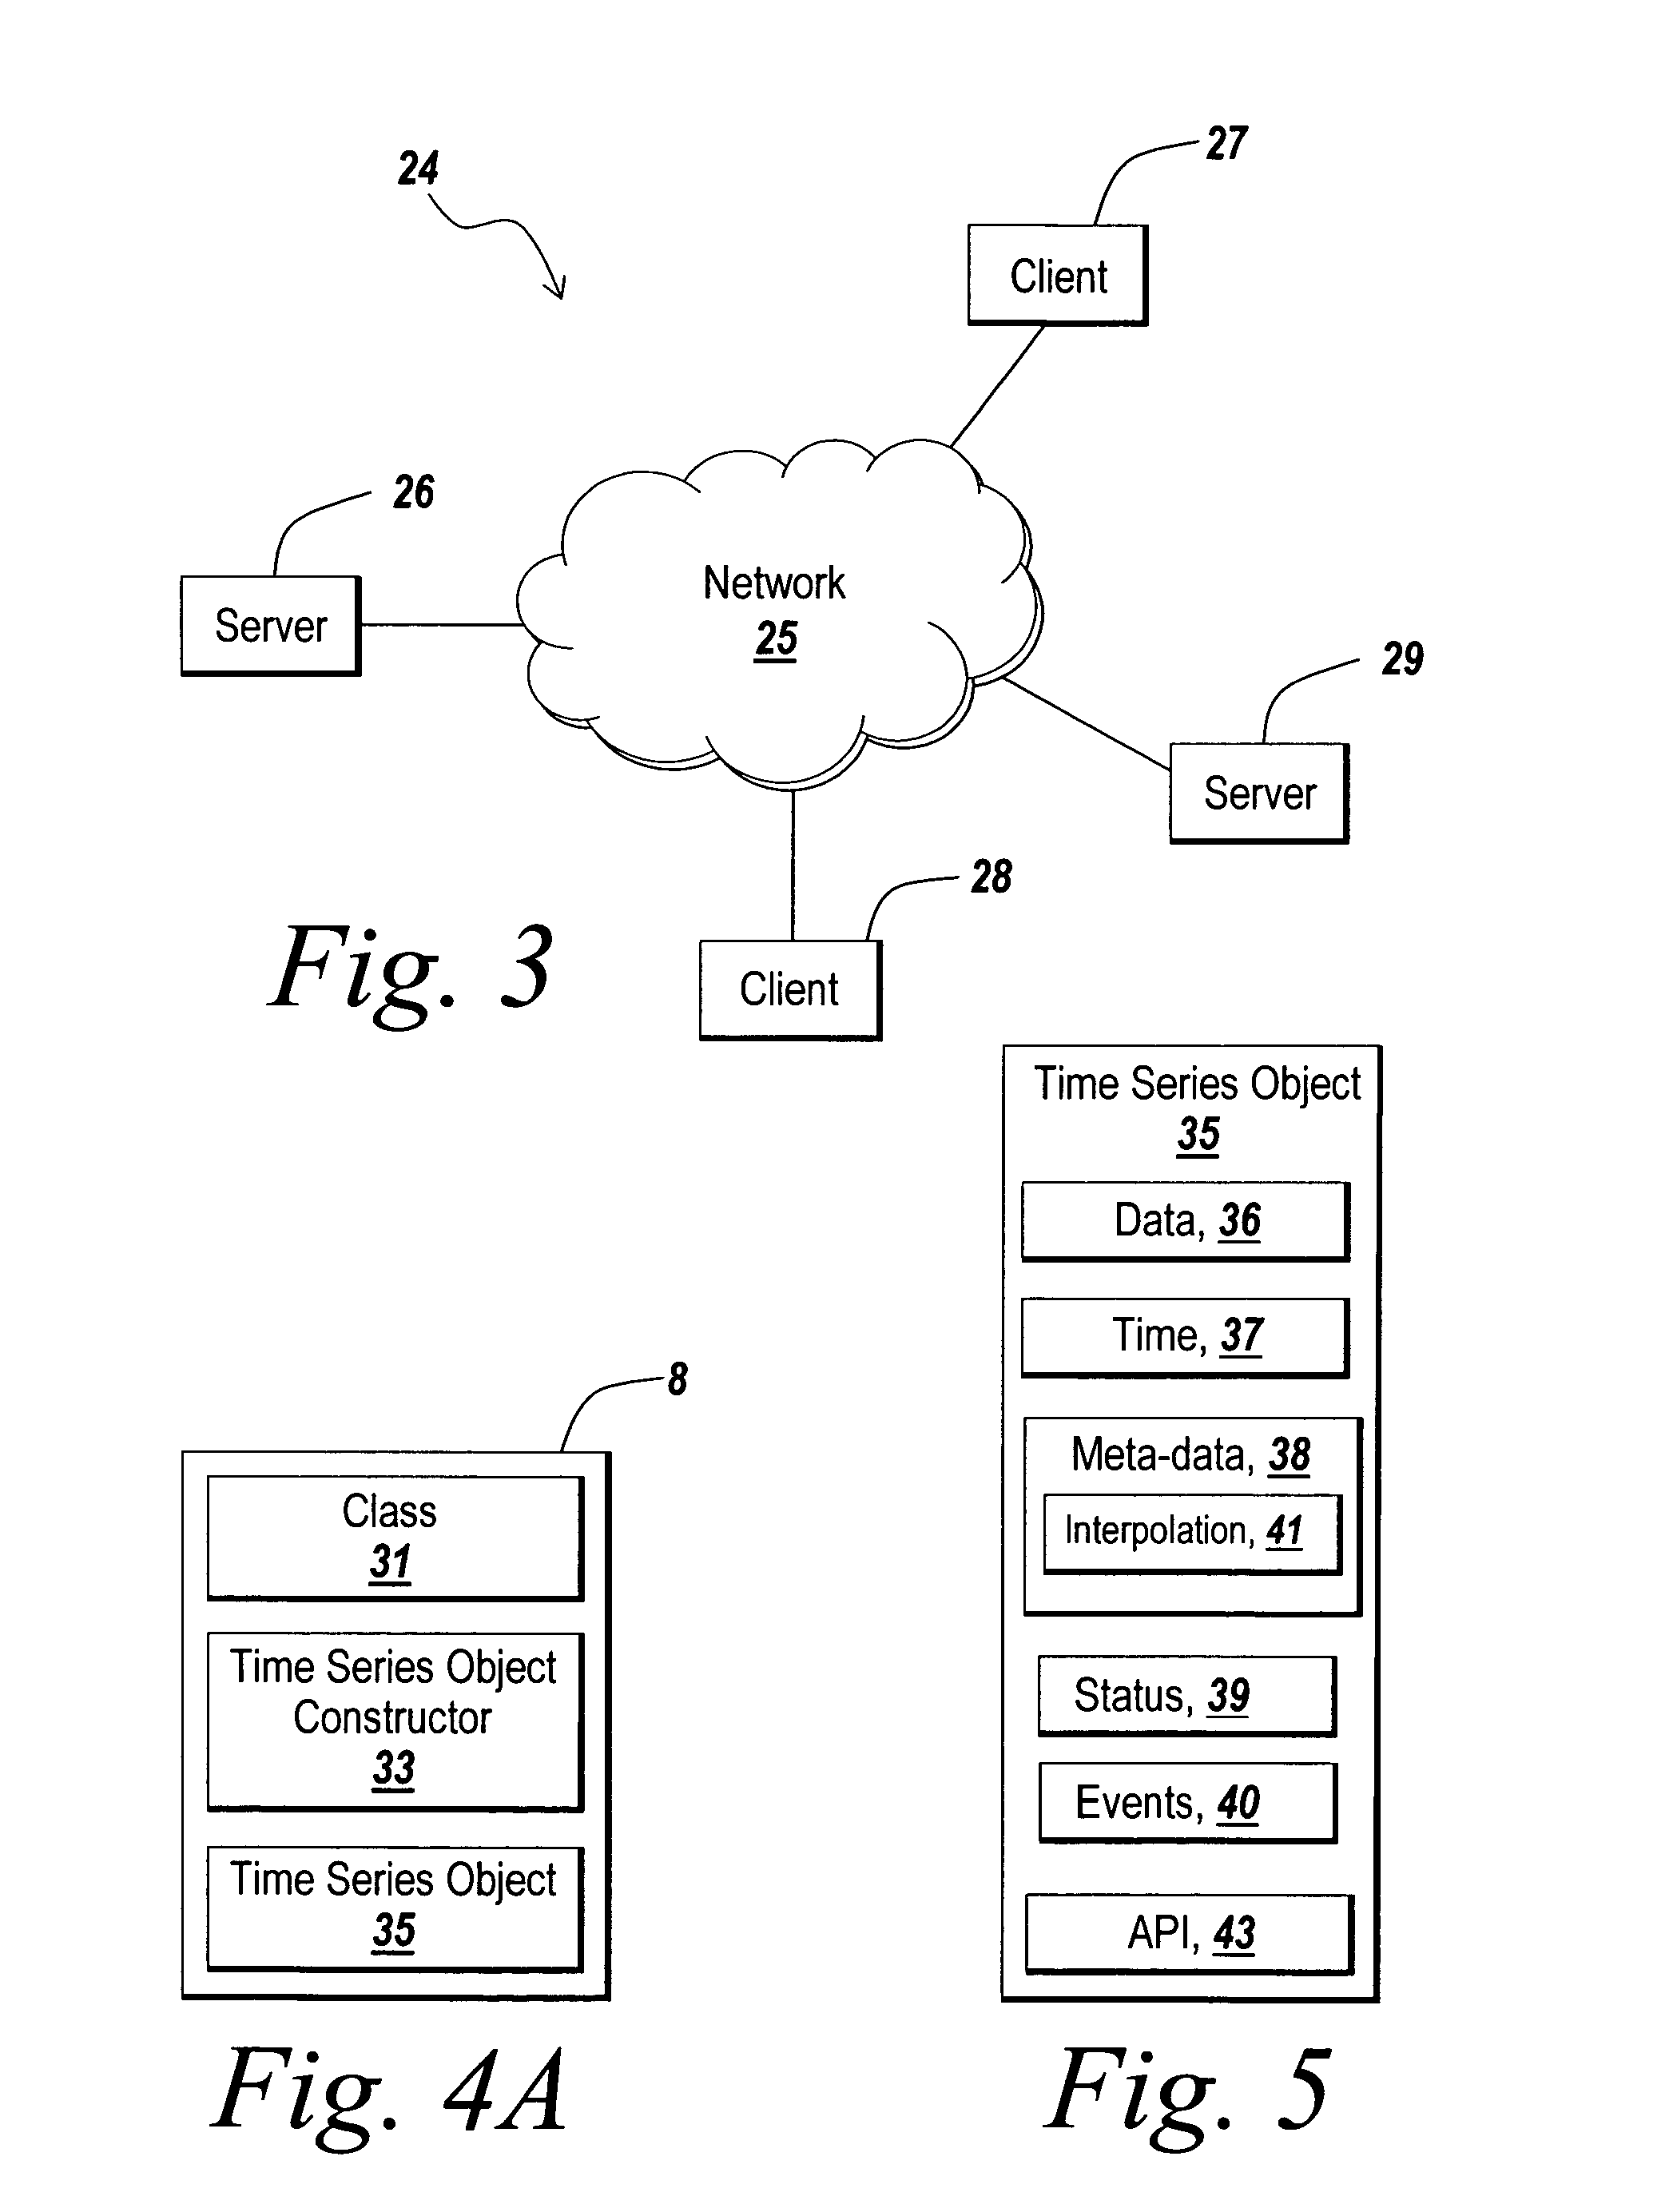 Graphical user interface for analysis of a sequence of data in object-oriented environment